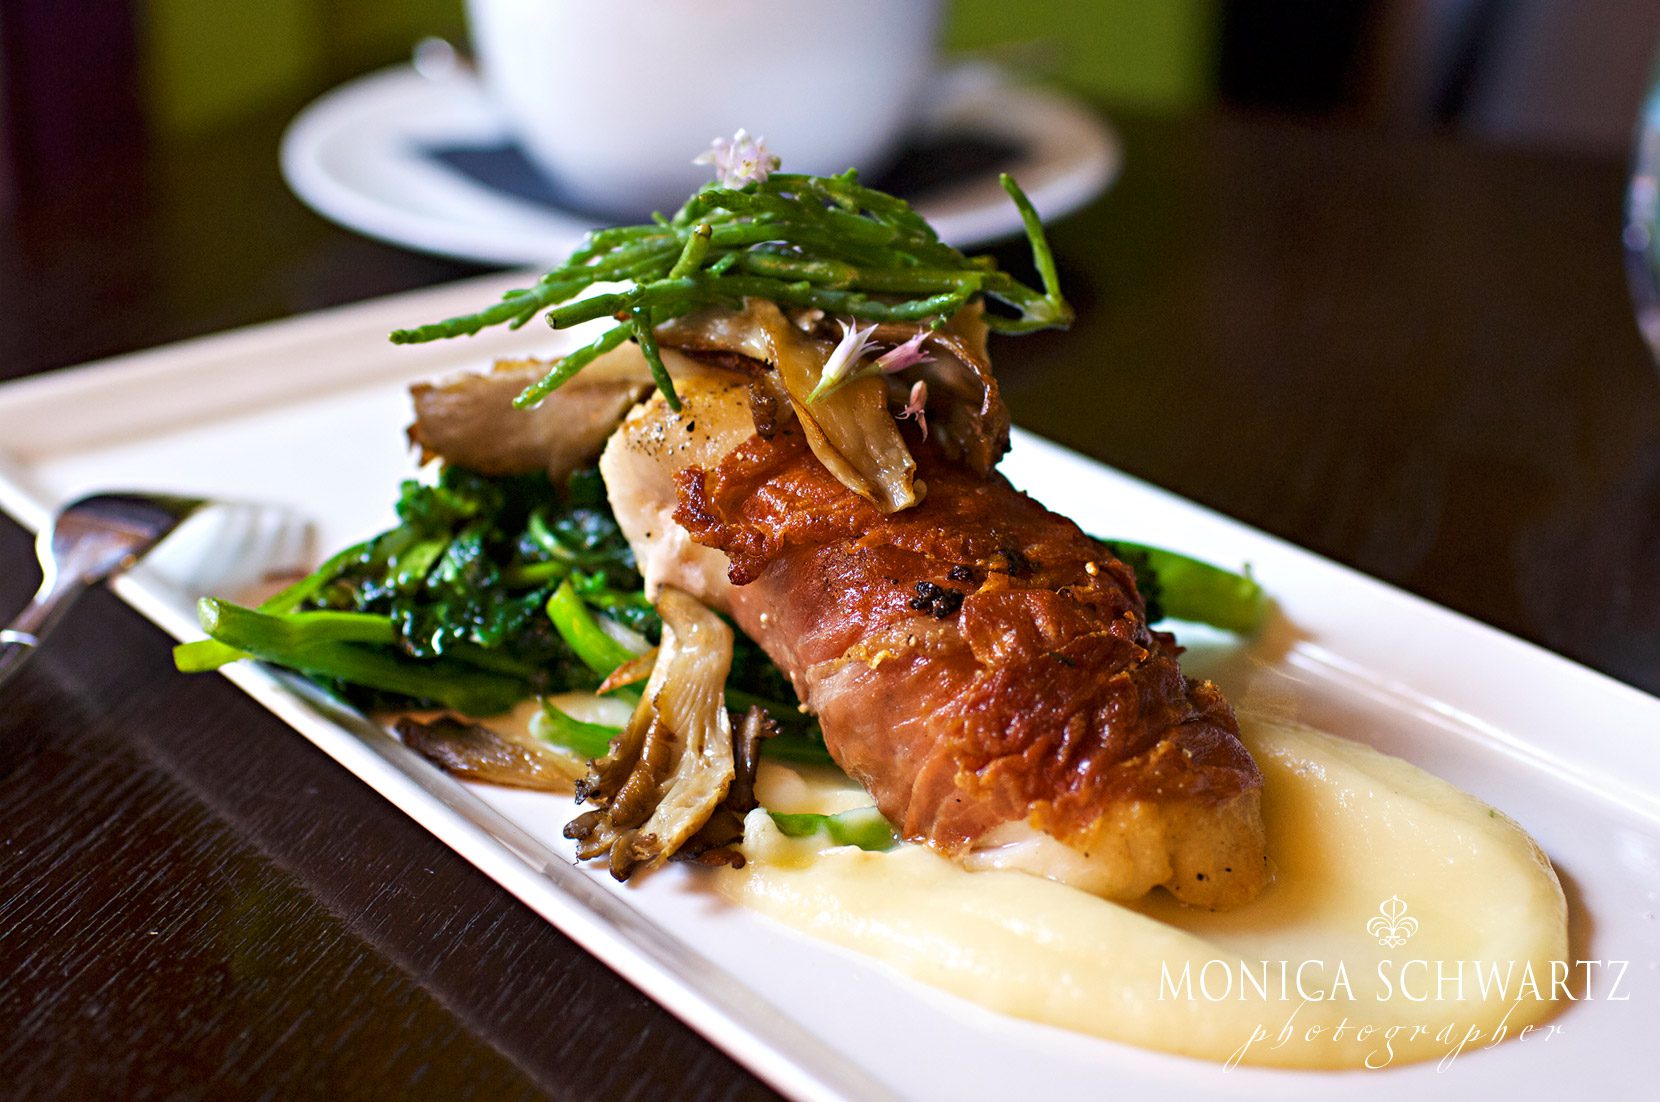 Prosciutto-wrapped-Cod-fillet-with-parsnip-puree-broccolini-and-trumpet-mushrooms-at-Basil-Restaurant-in-Carmel-by-the-Sea-California